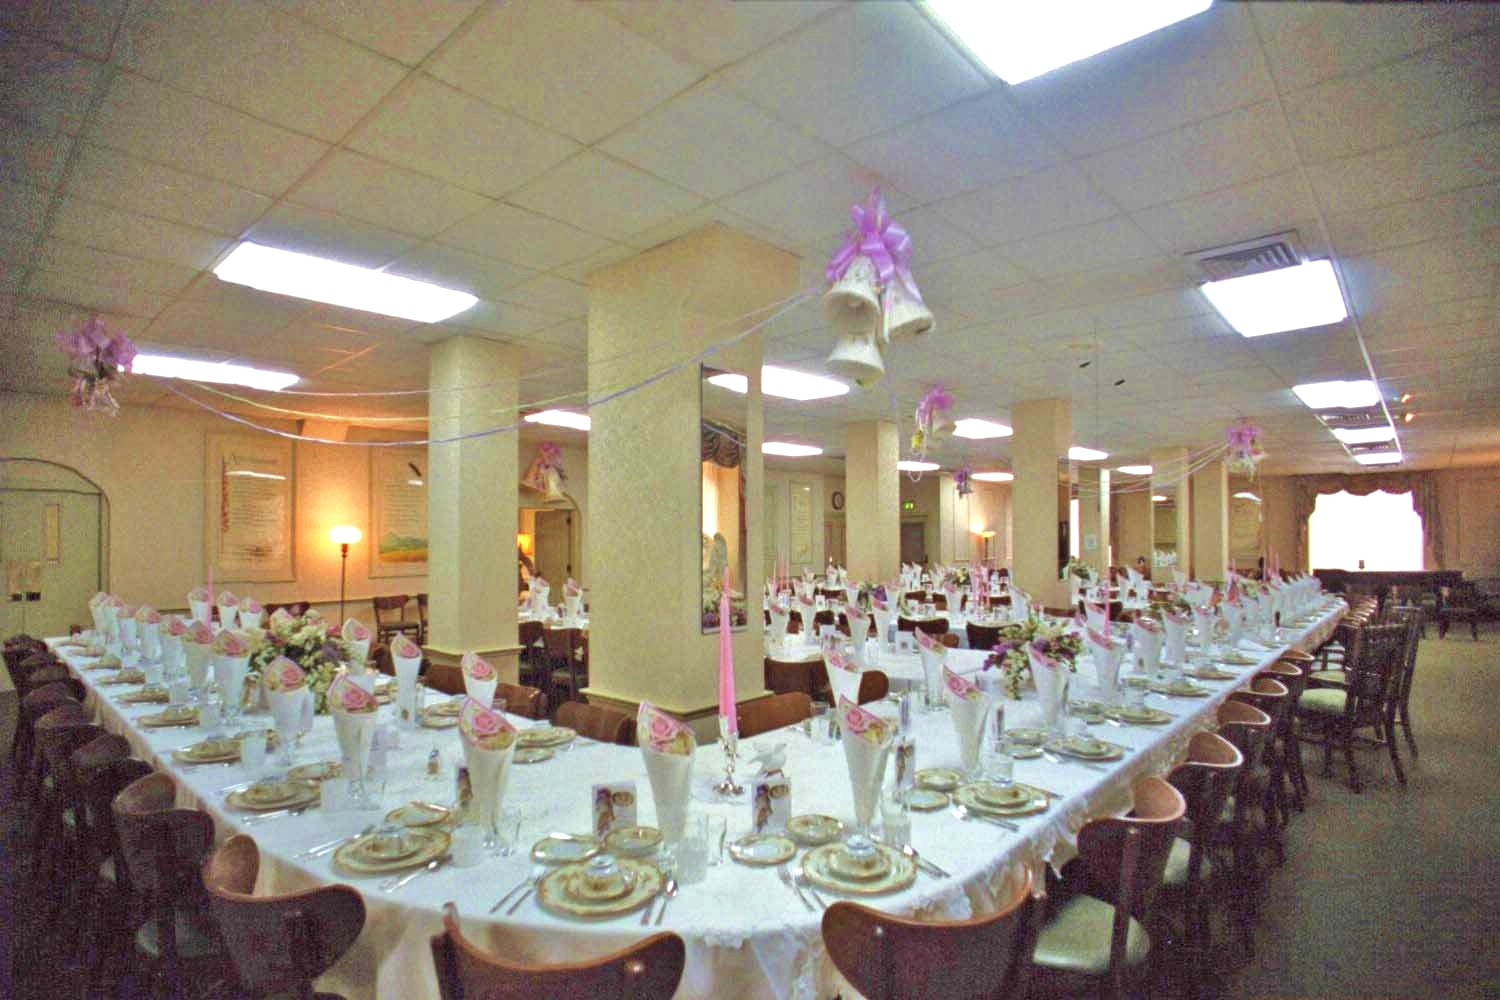 The Divine Tracy Hotel Banquet Hall